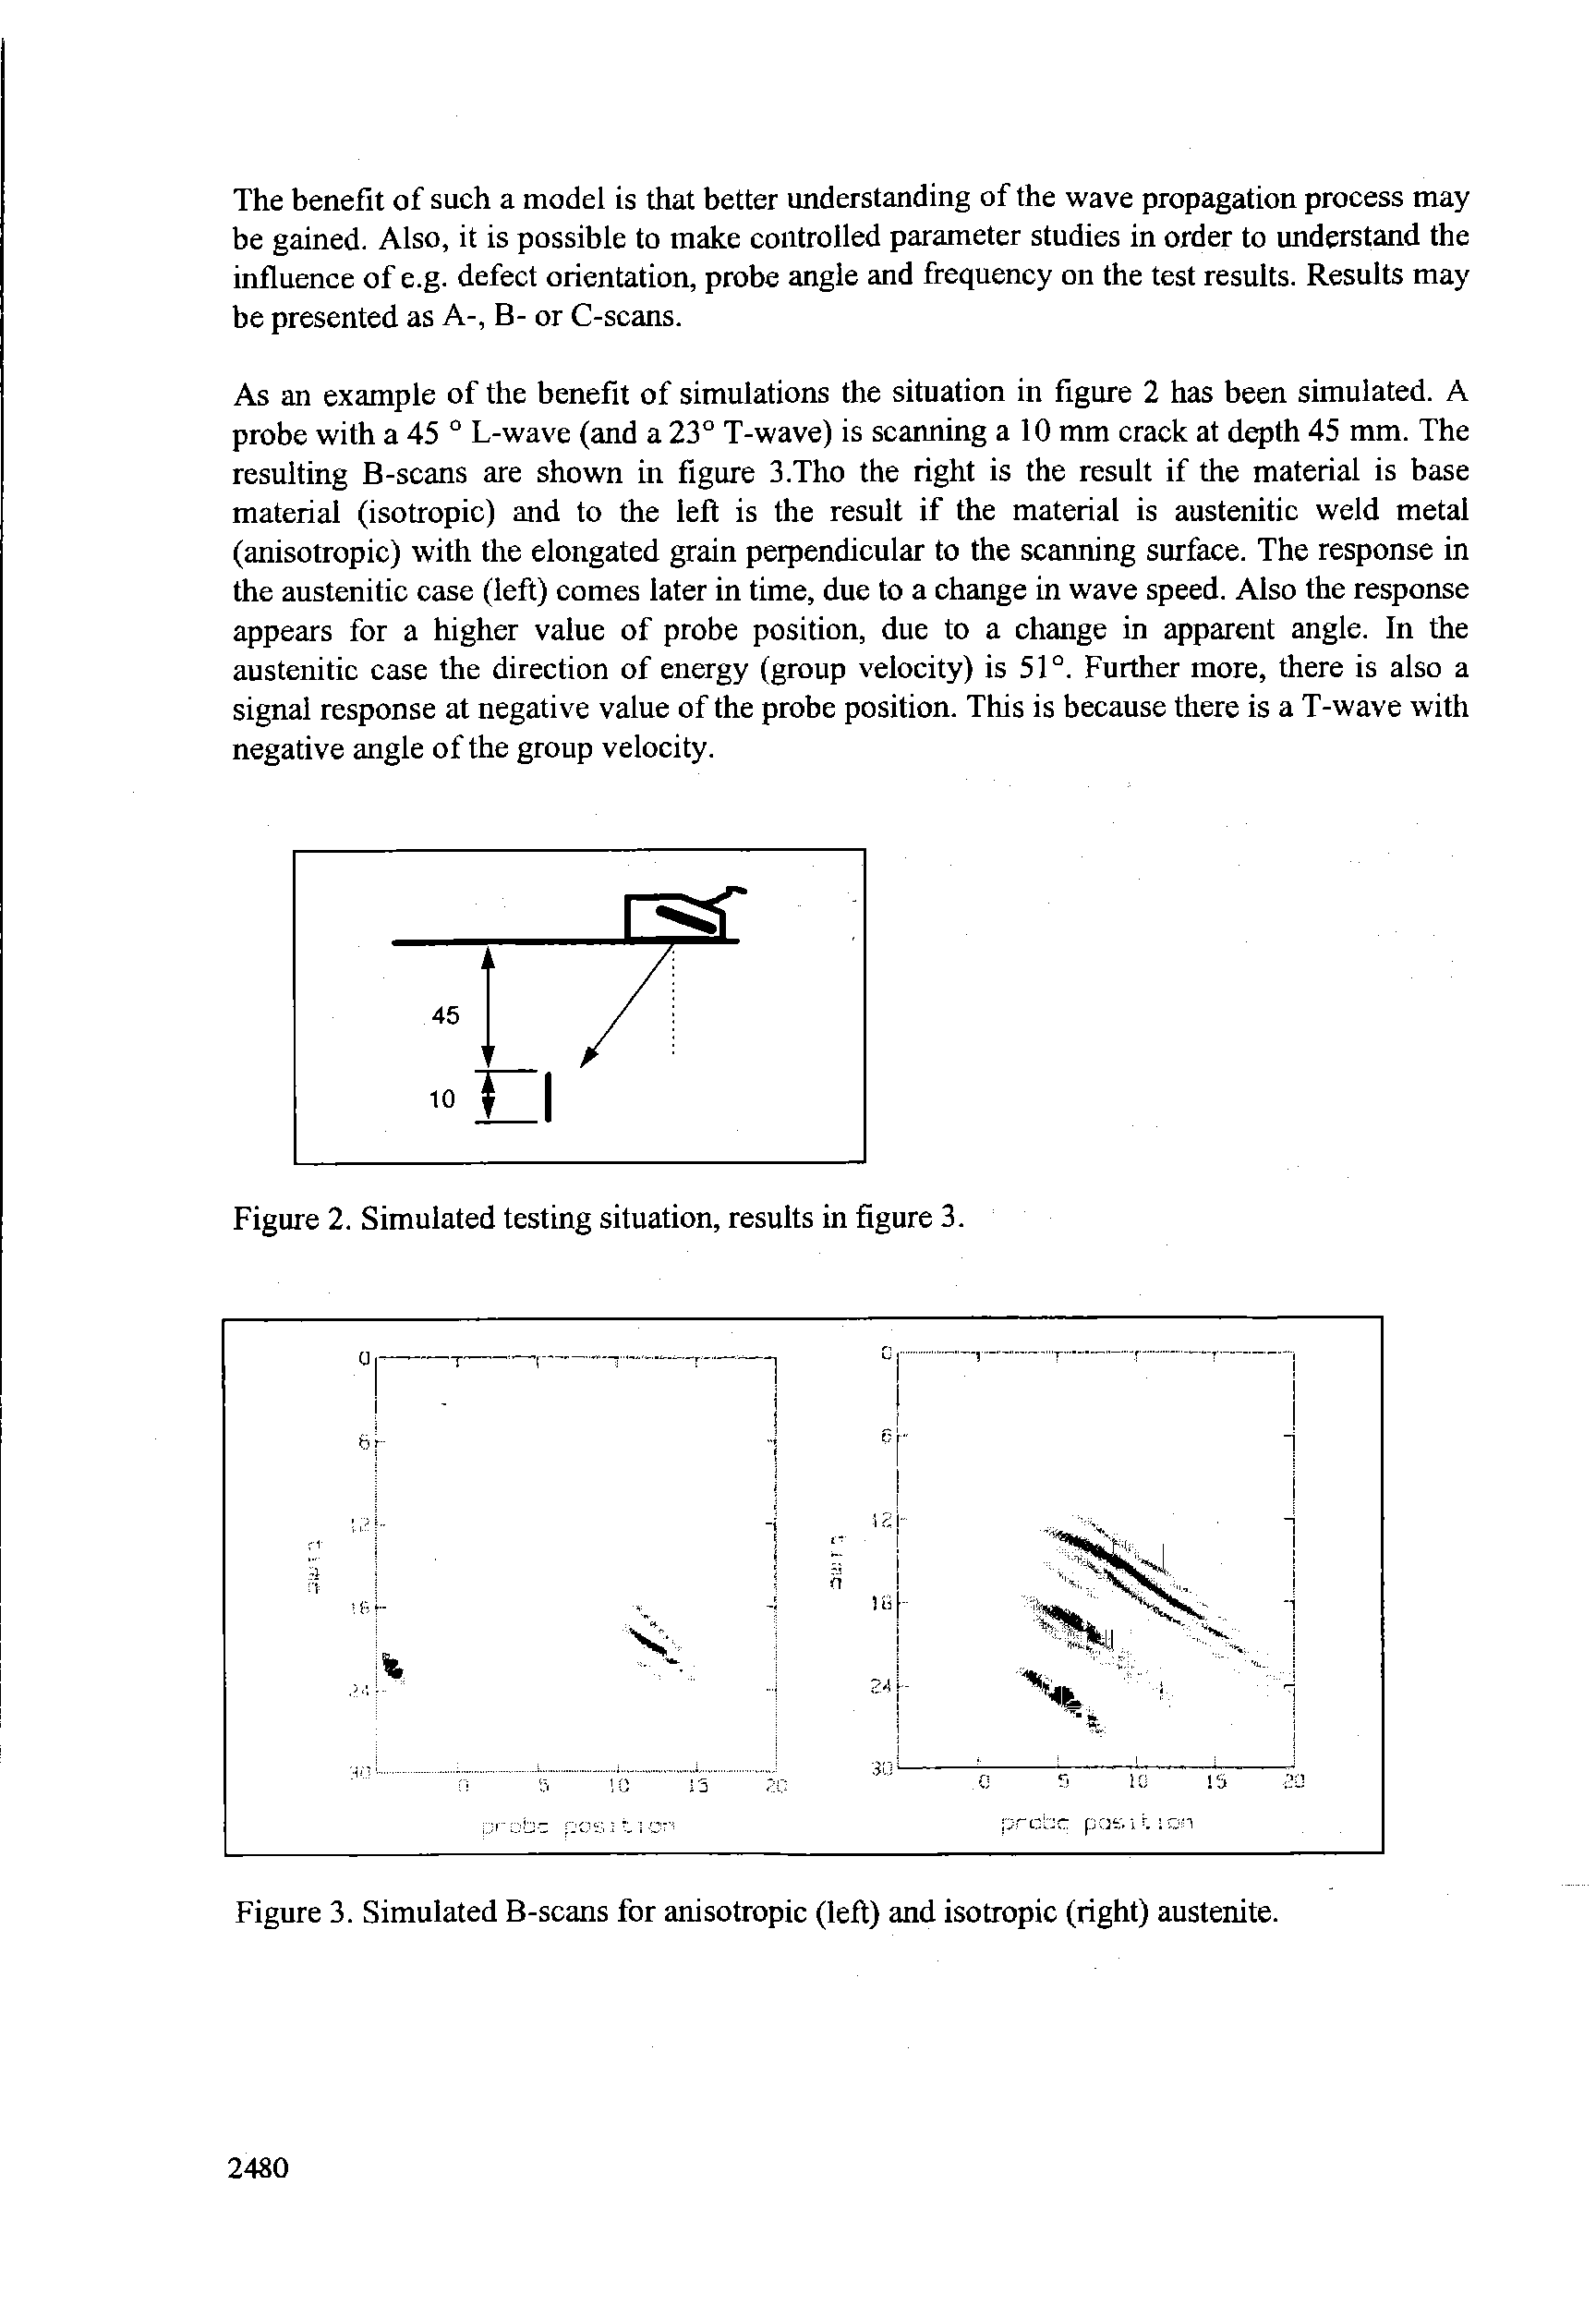 Figure 2. Simulated testing situation, results in figure 3.